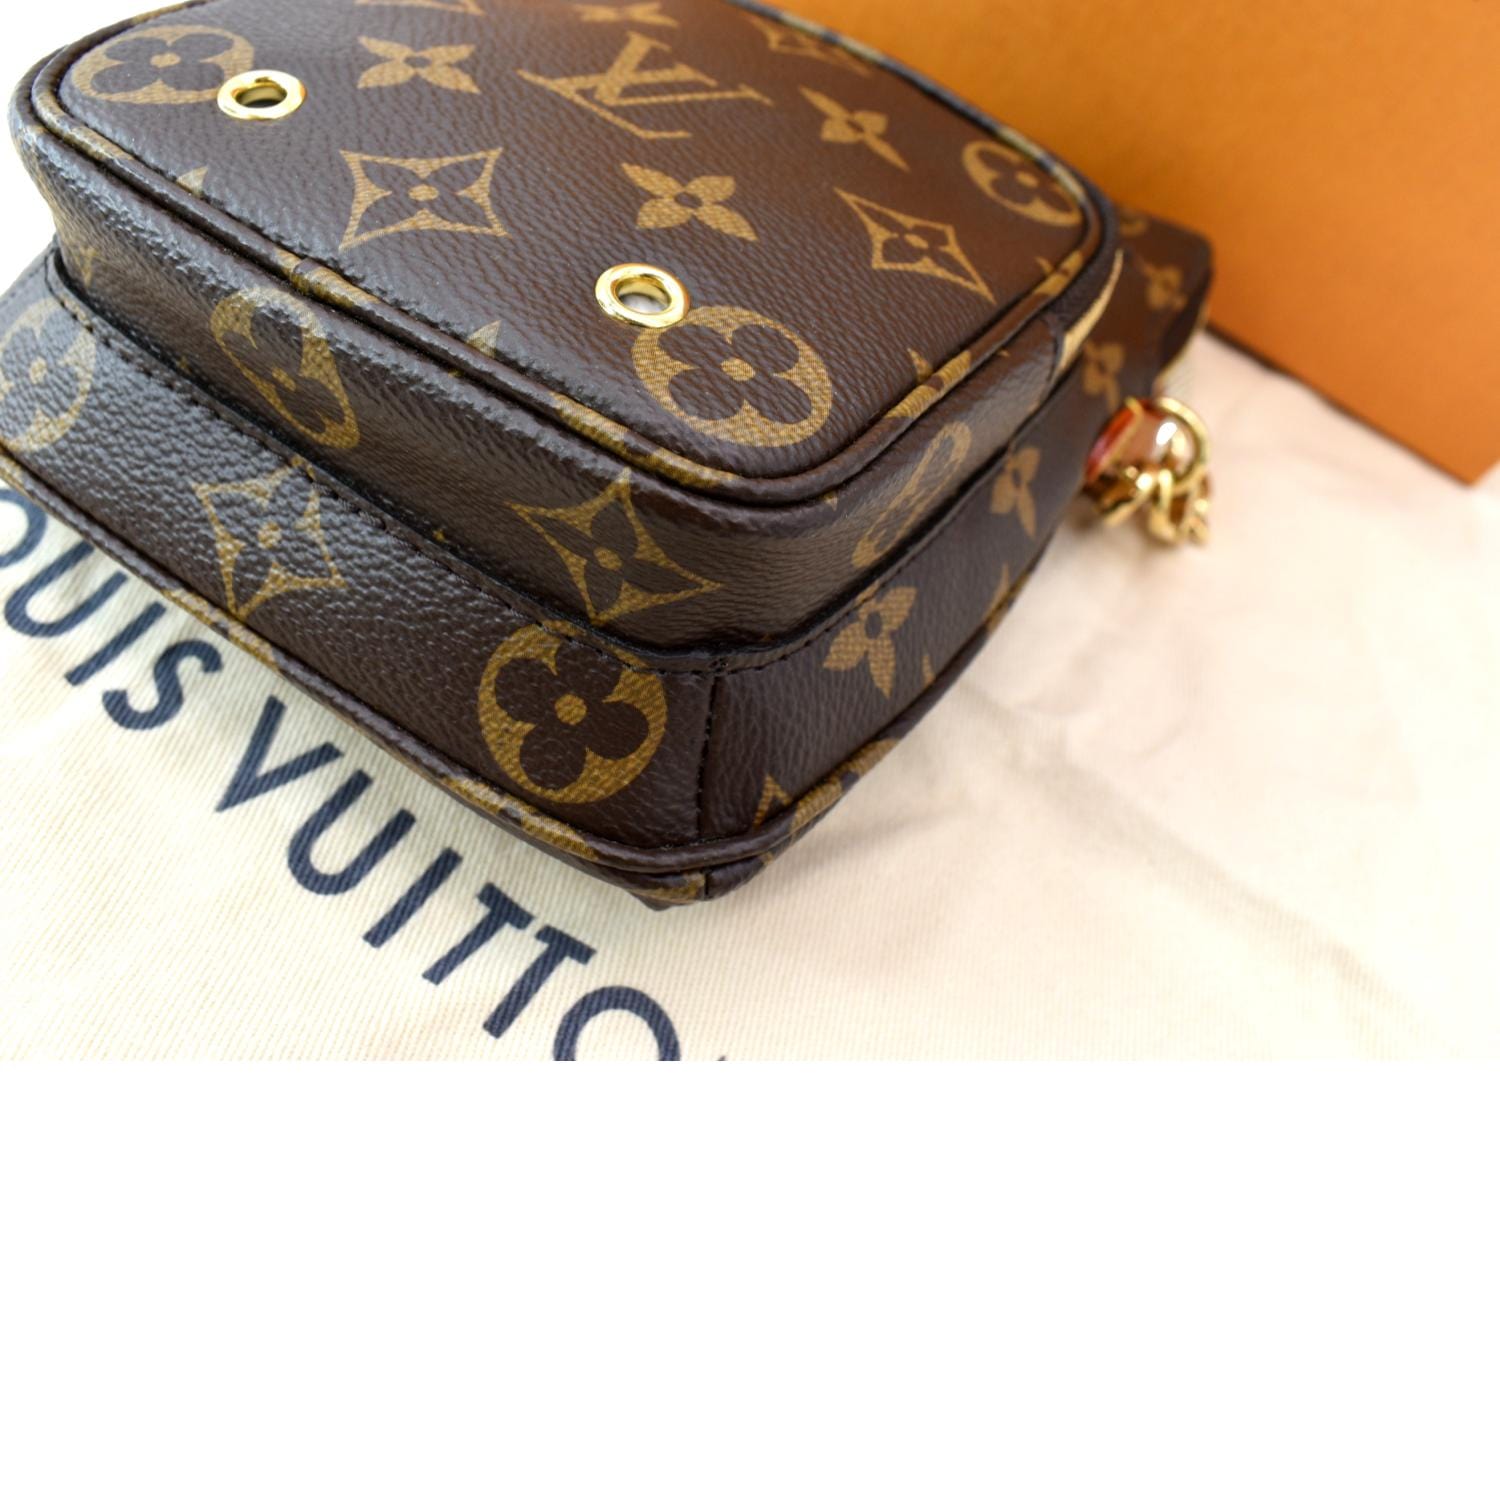 Louis Vuitton New LV Utility Phone Sleeve Bag Unboxing plus What